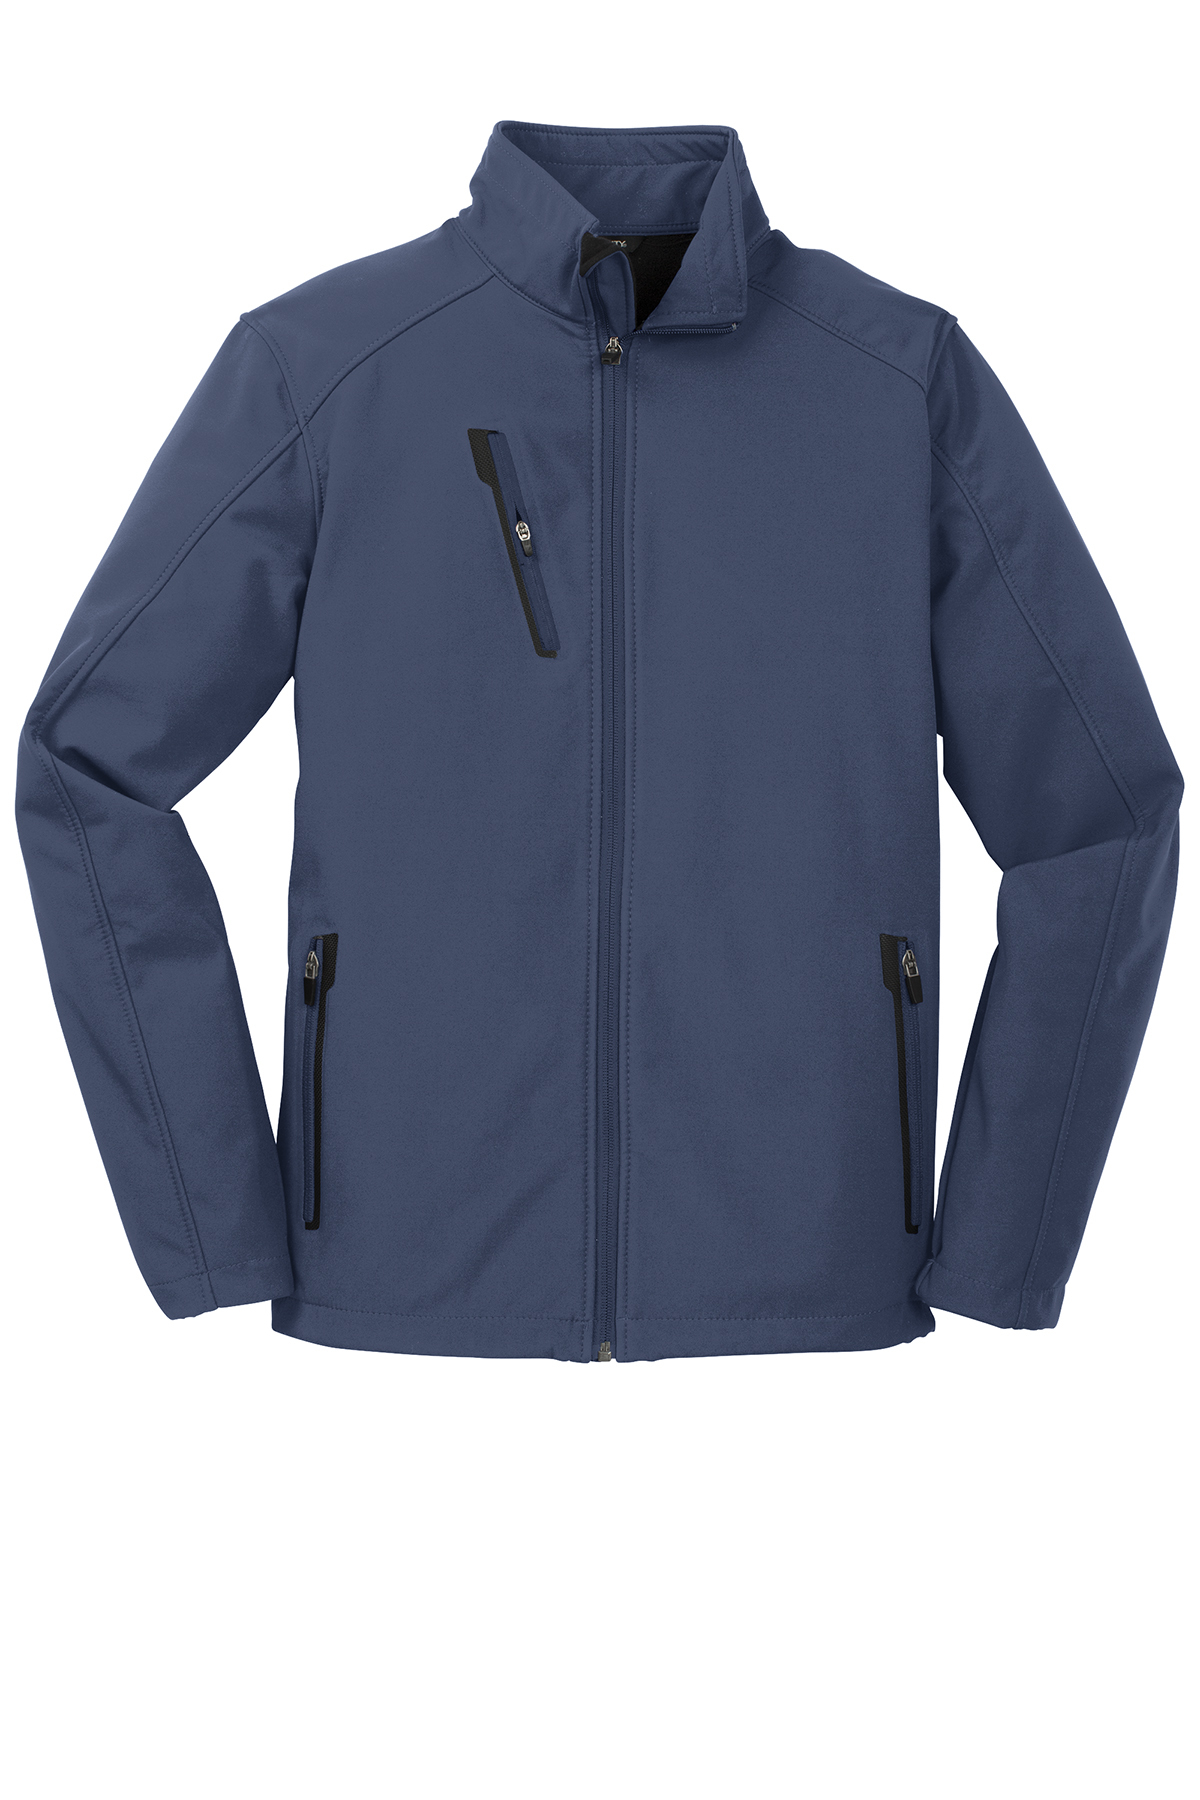 Port Authority Welded Soft Shell Jacket | Product | SanMar